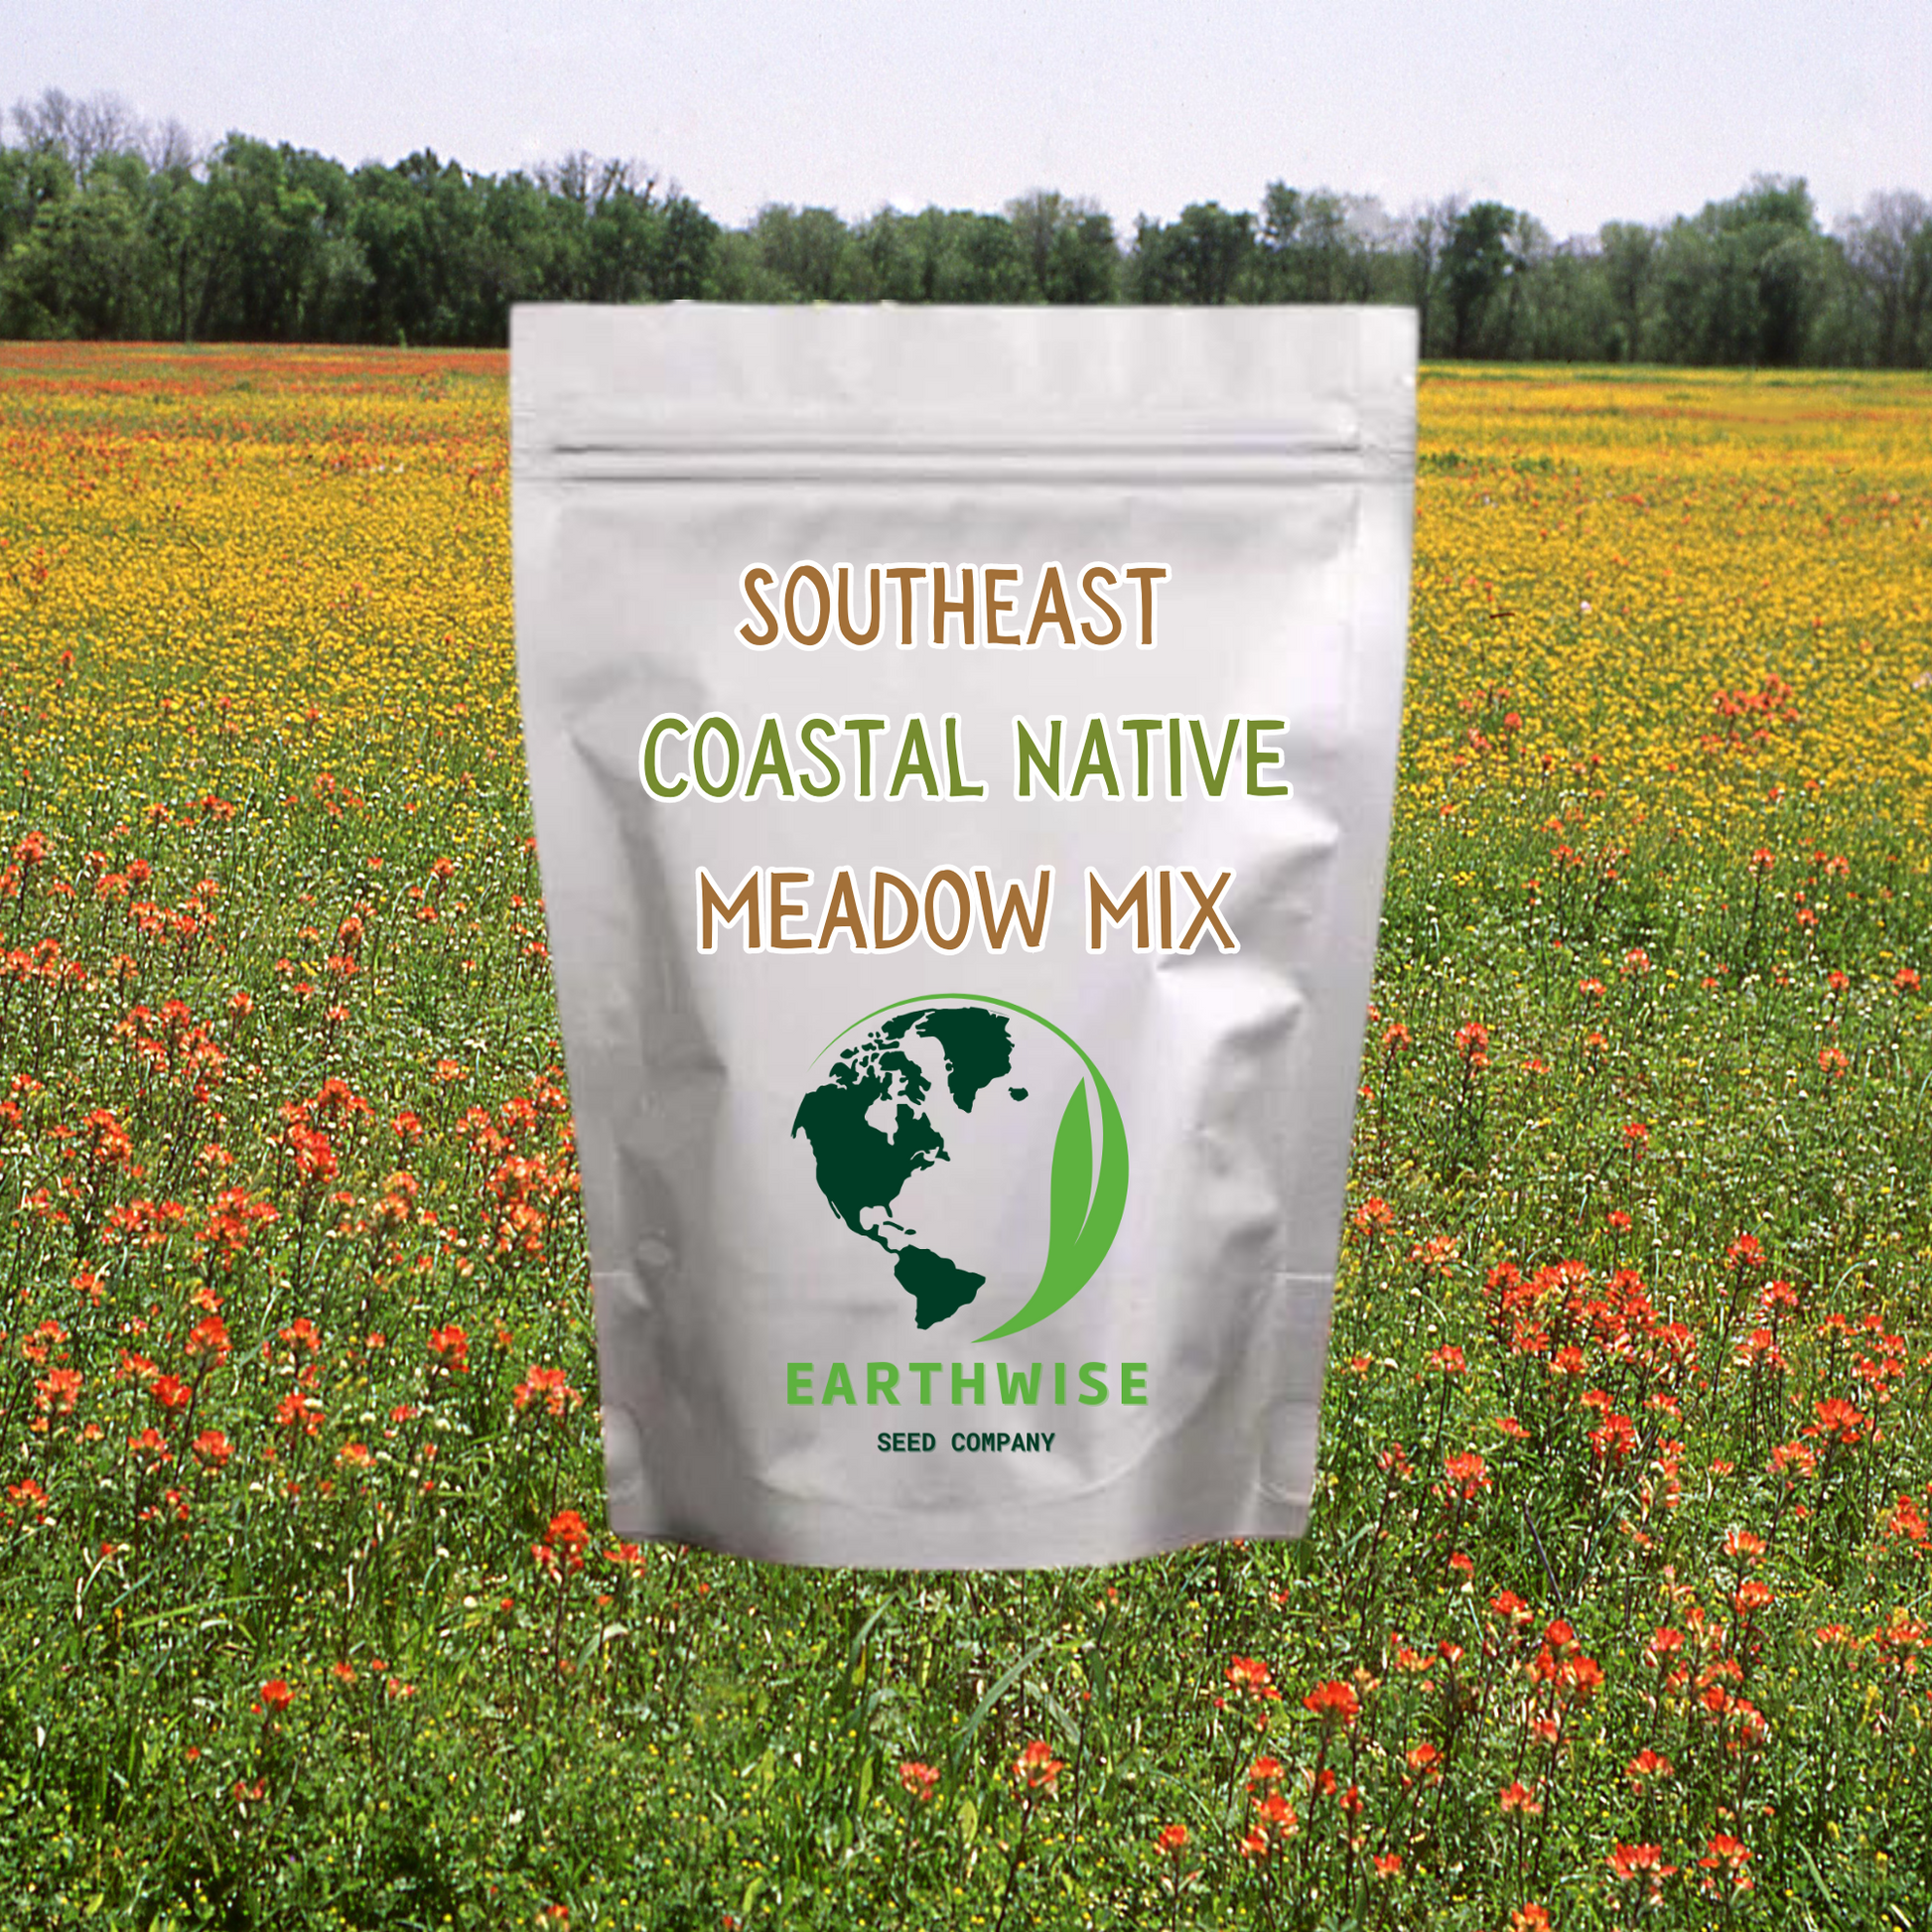 Southeast Native Wildflower Seed Mix